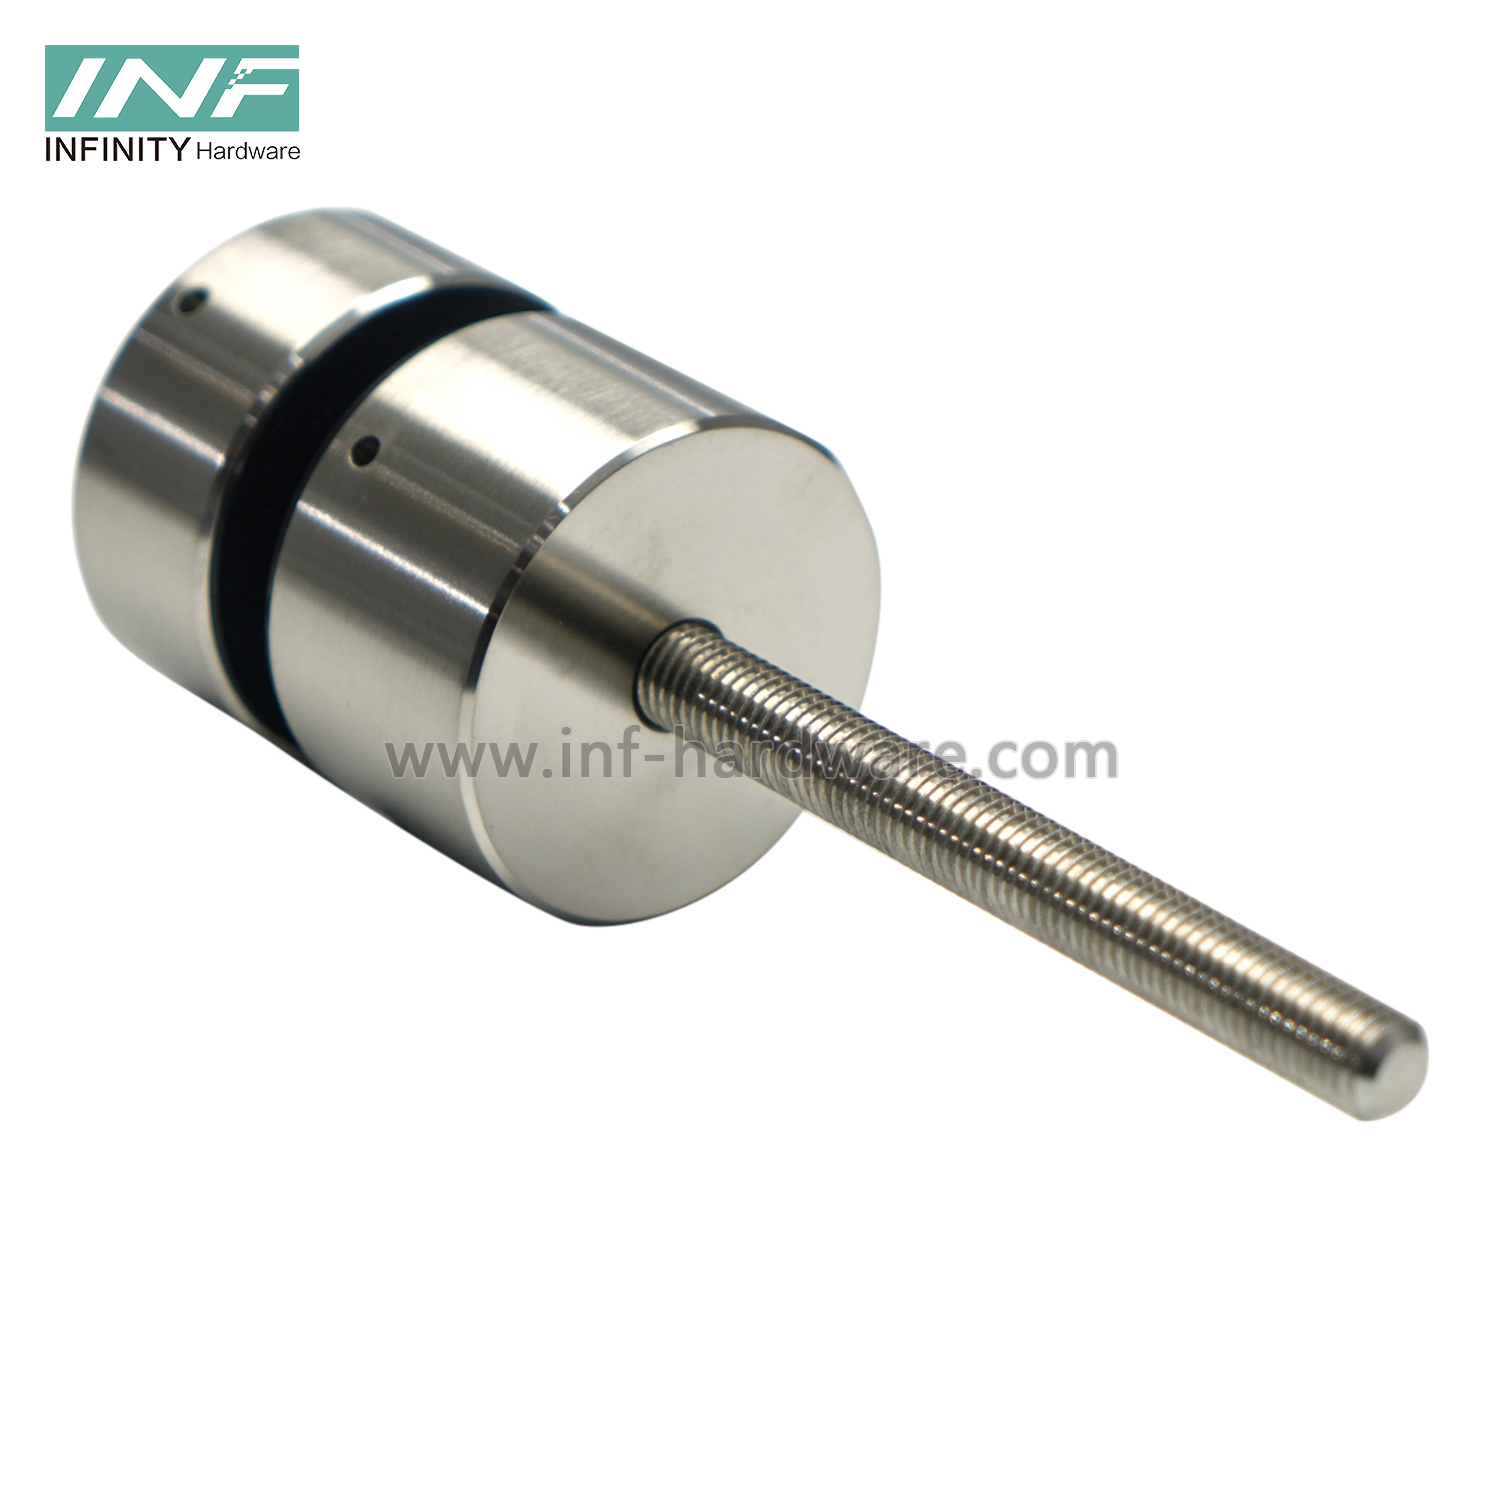 Glass Fitting Stainless Steel Double Pin Fitting Round Solid Standoff